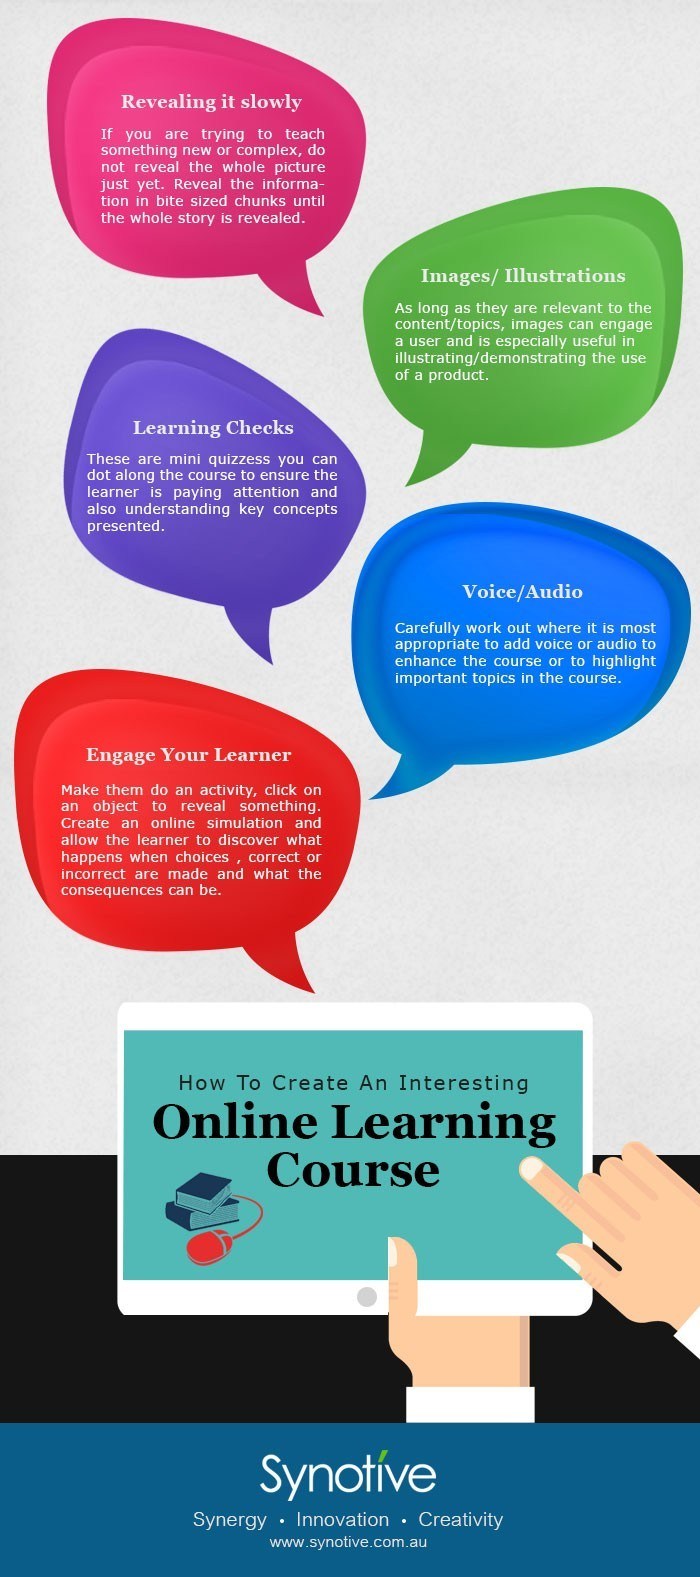 How to create an interesting online learning course thumbnail